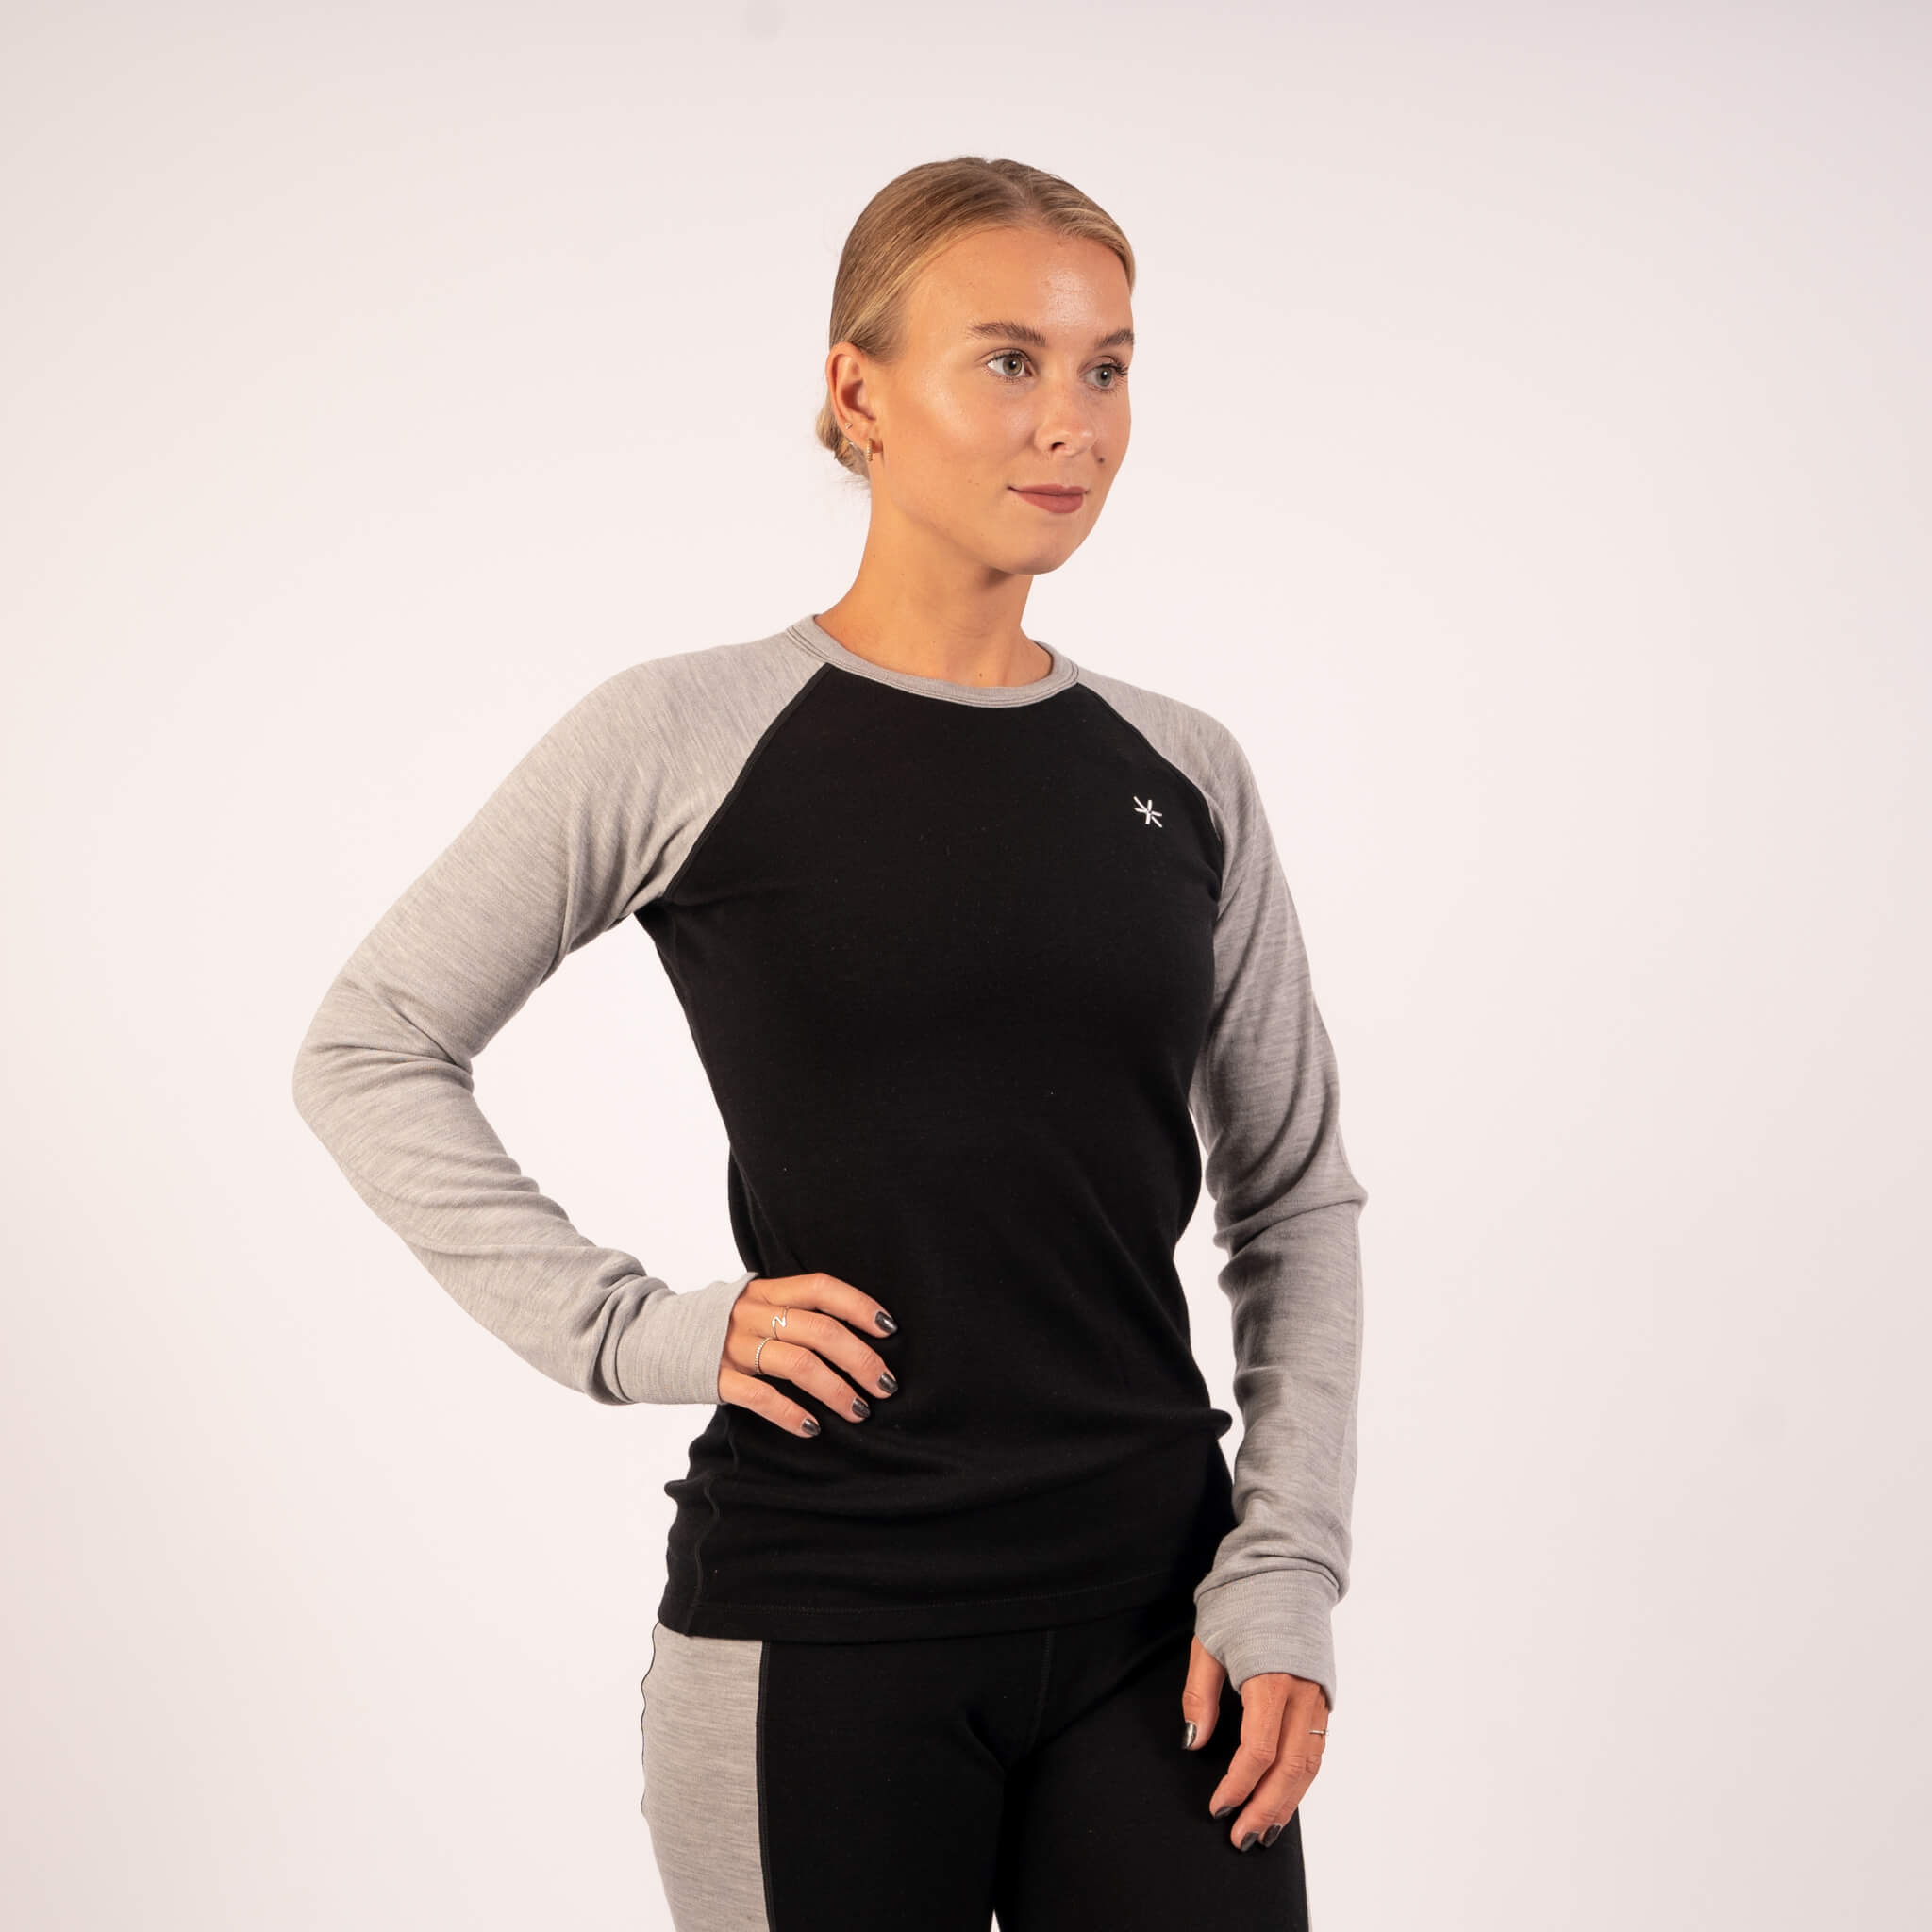 Women's Sportswear On Sale | Limited Stock Activewear | Don't Miss Out ...